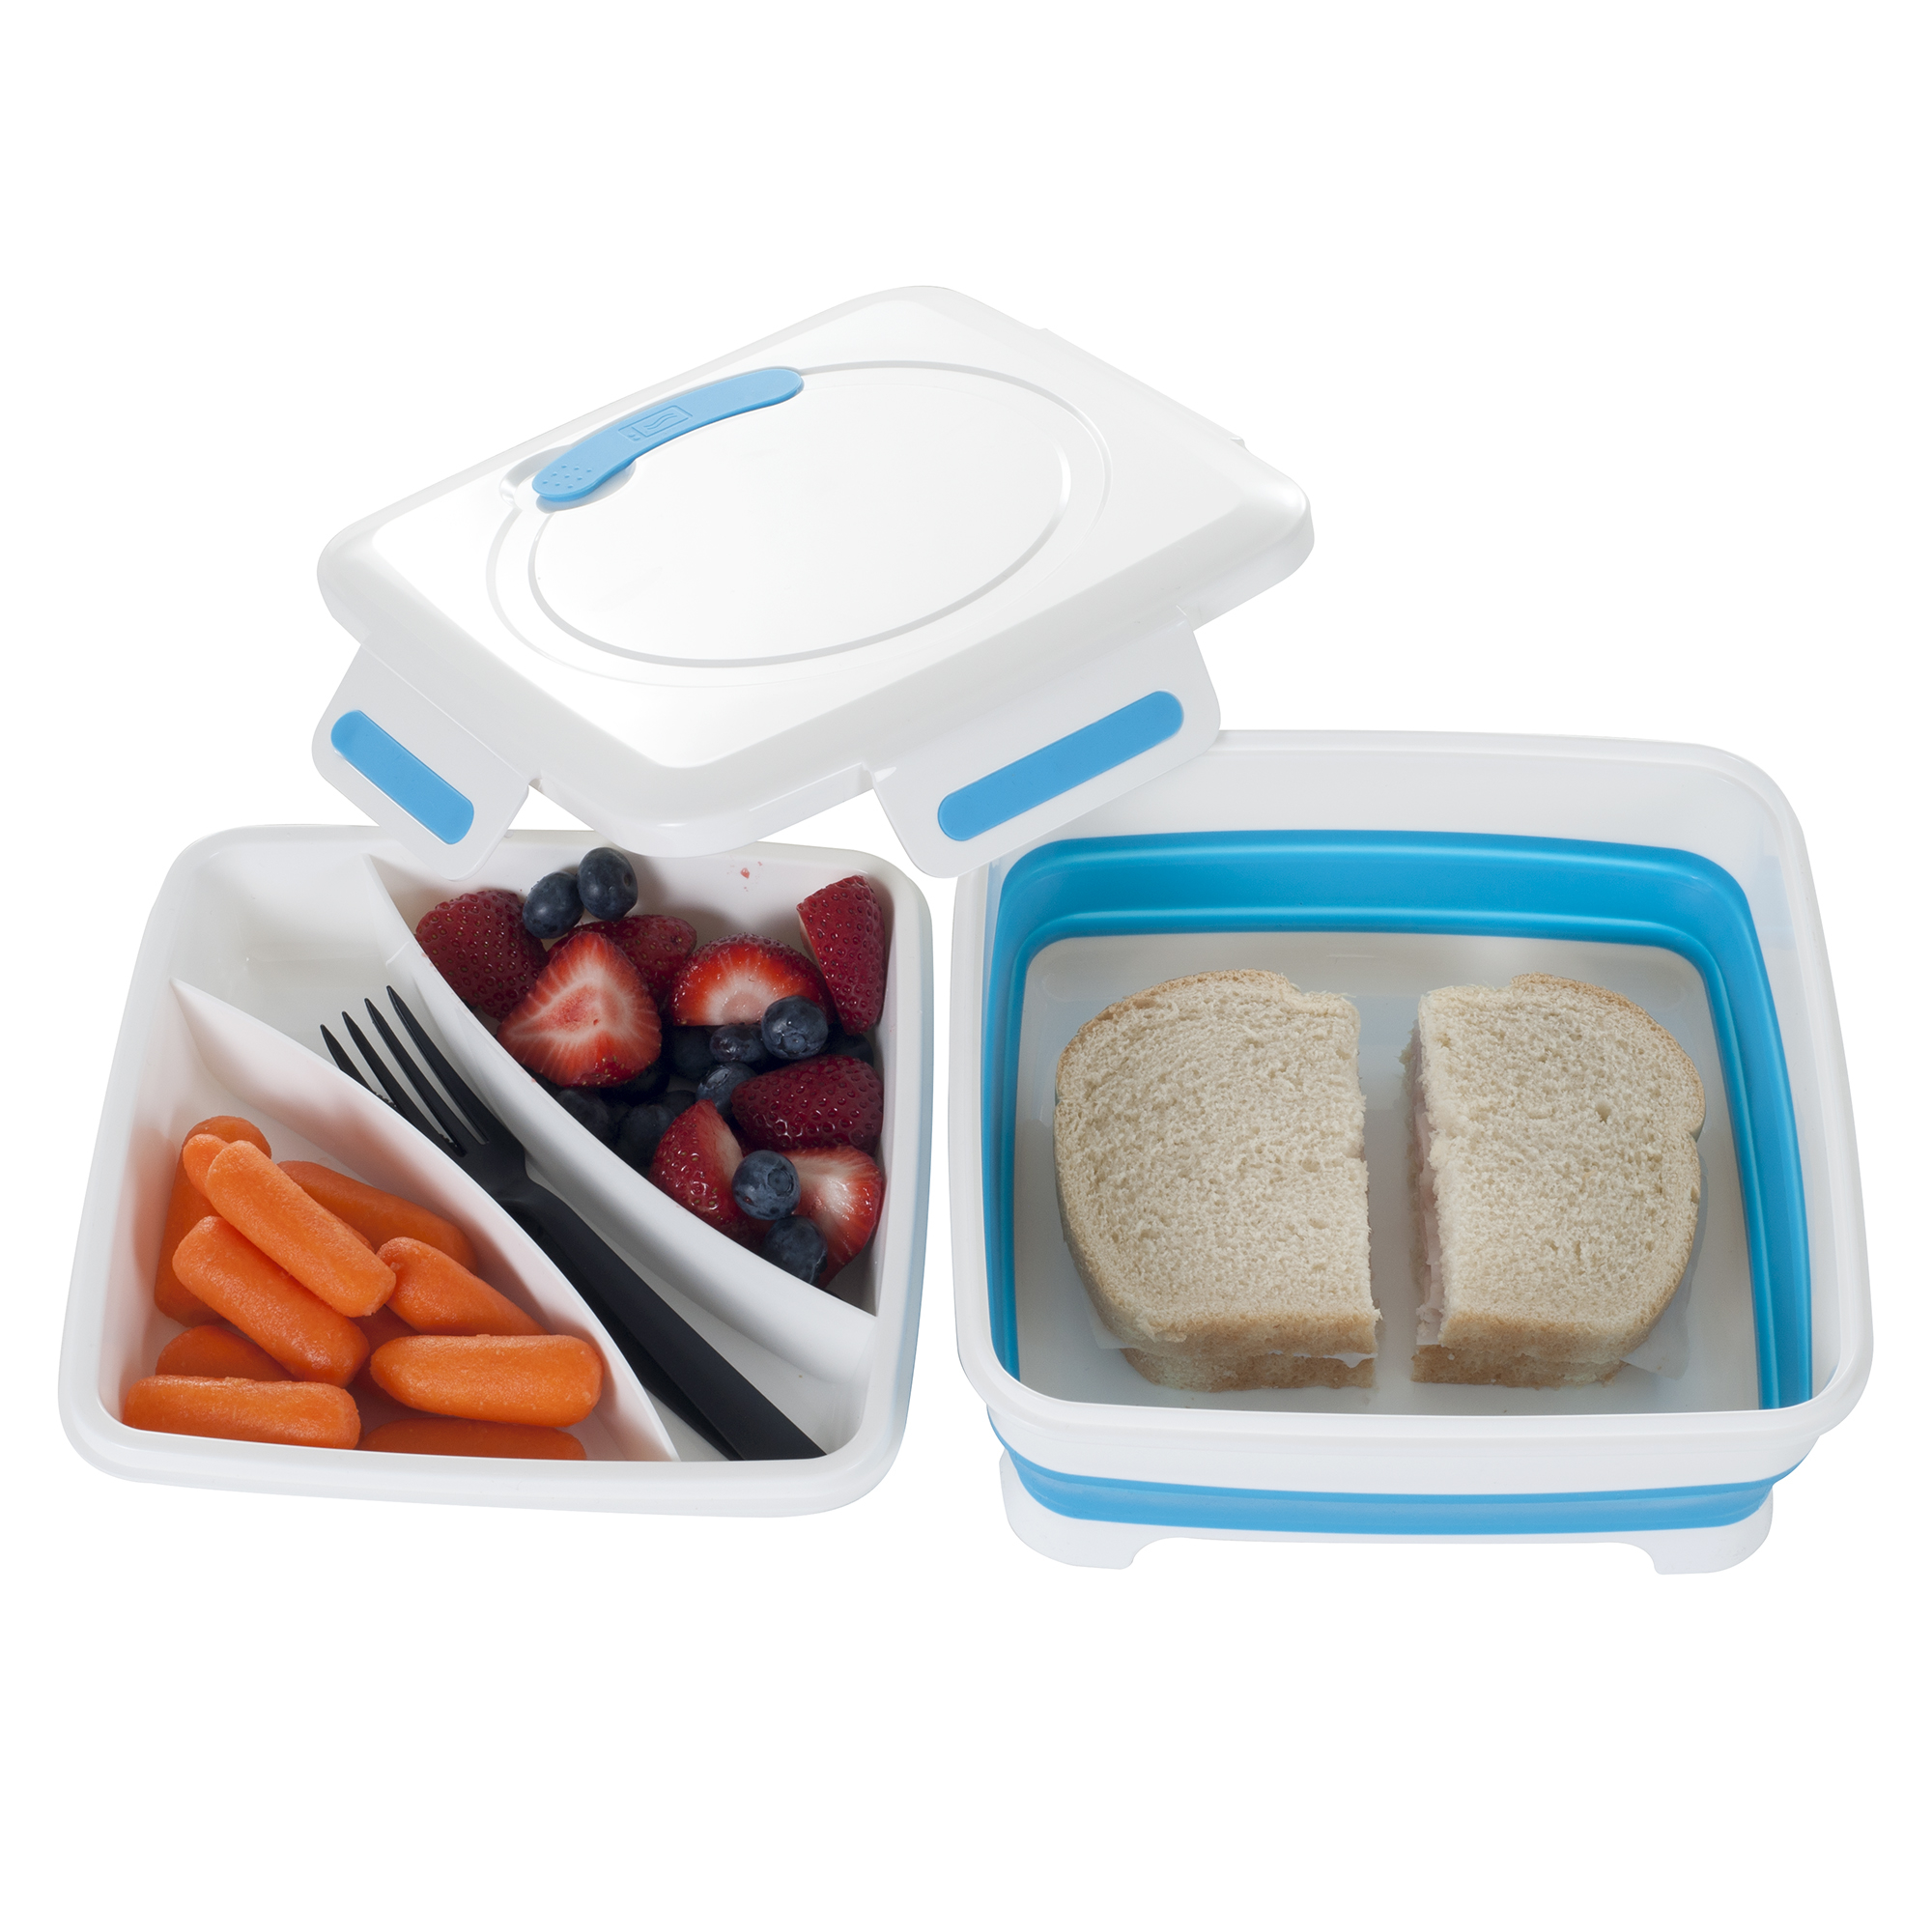 Classic Cuisine Square Expandable Lunch Box with Dividers